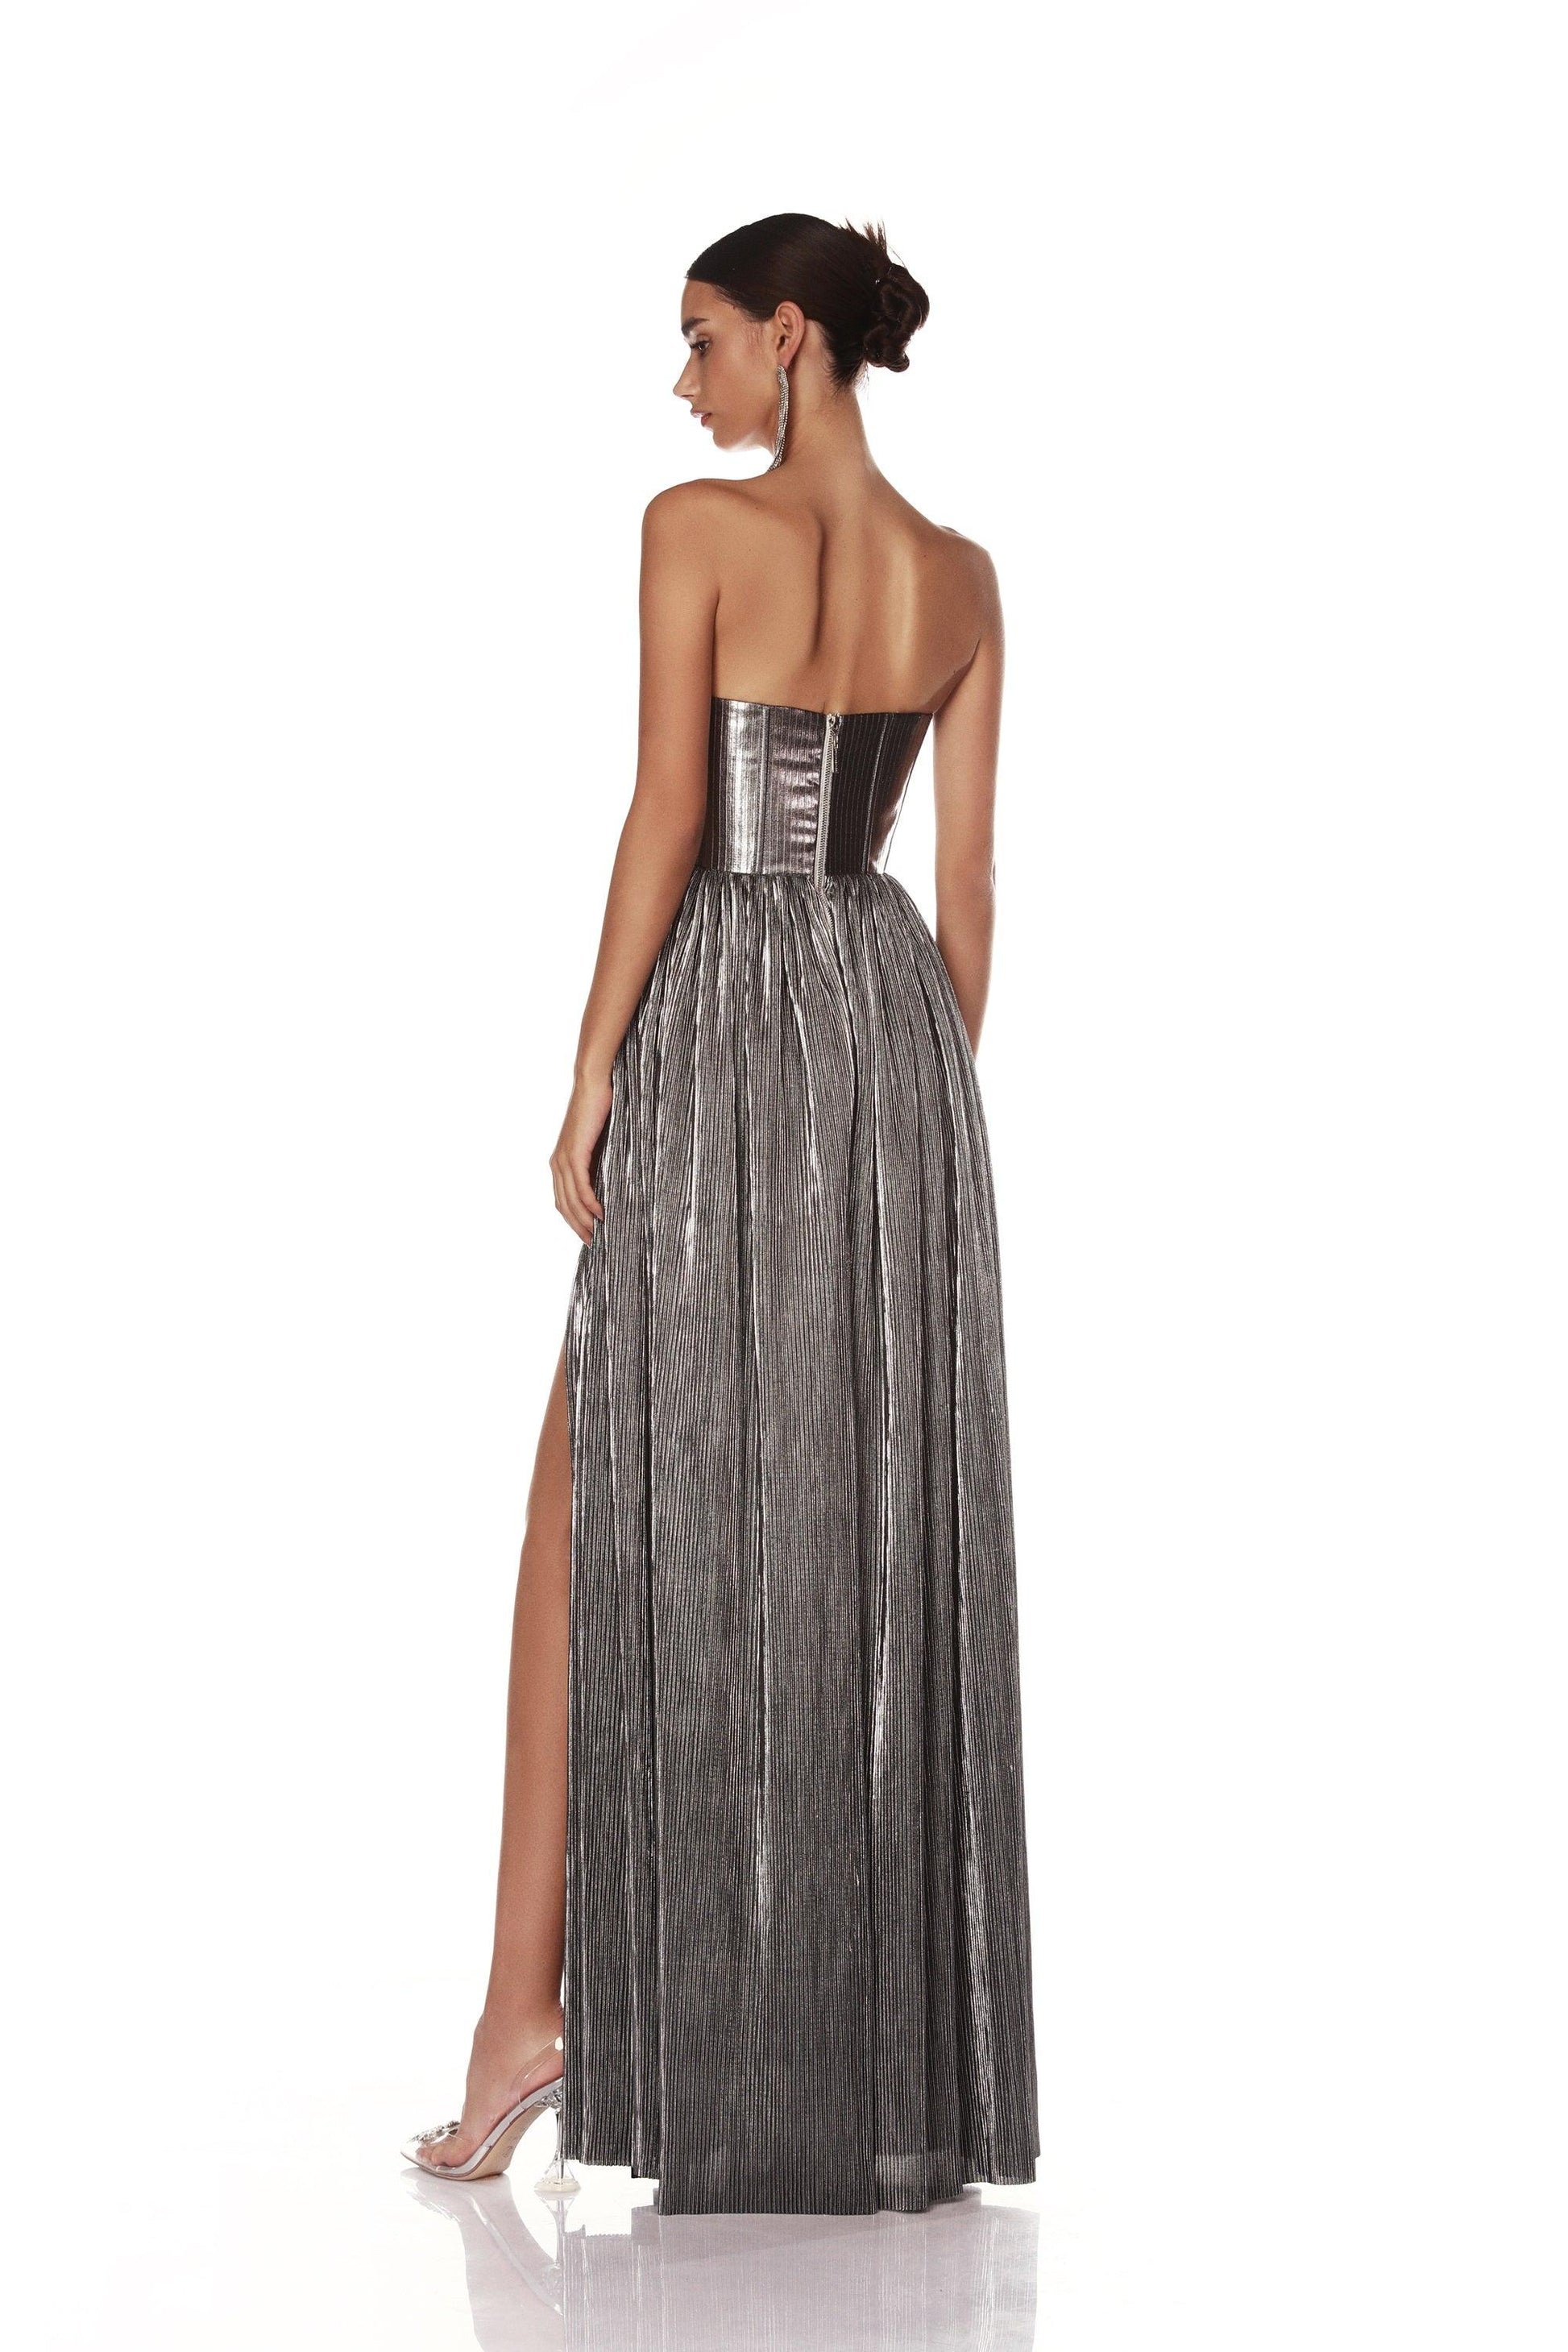 Florence Strapless Silver Gown - BRONX AND BANCO